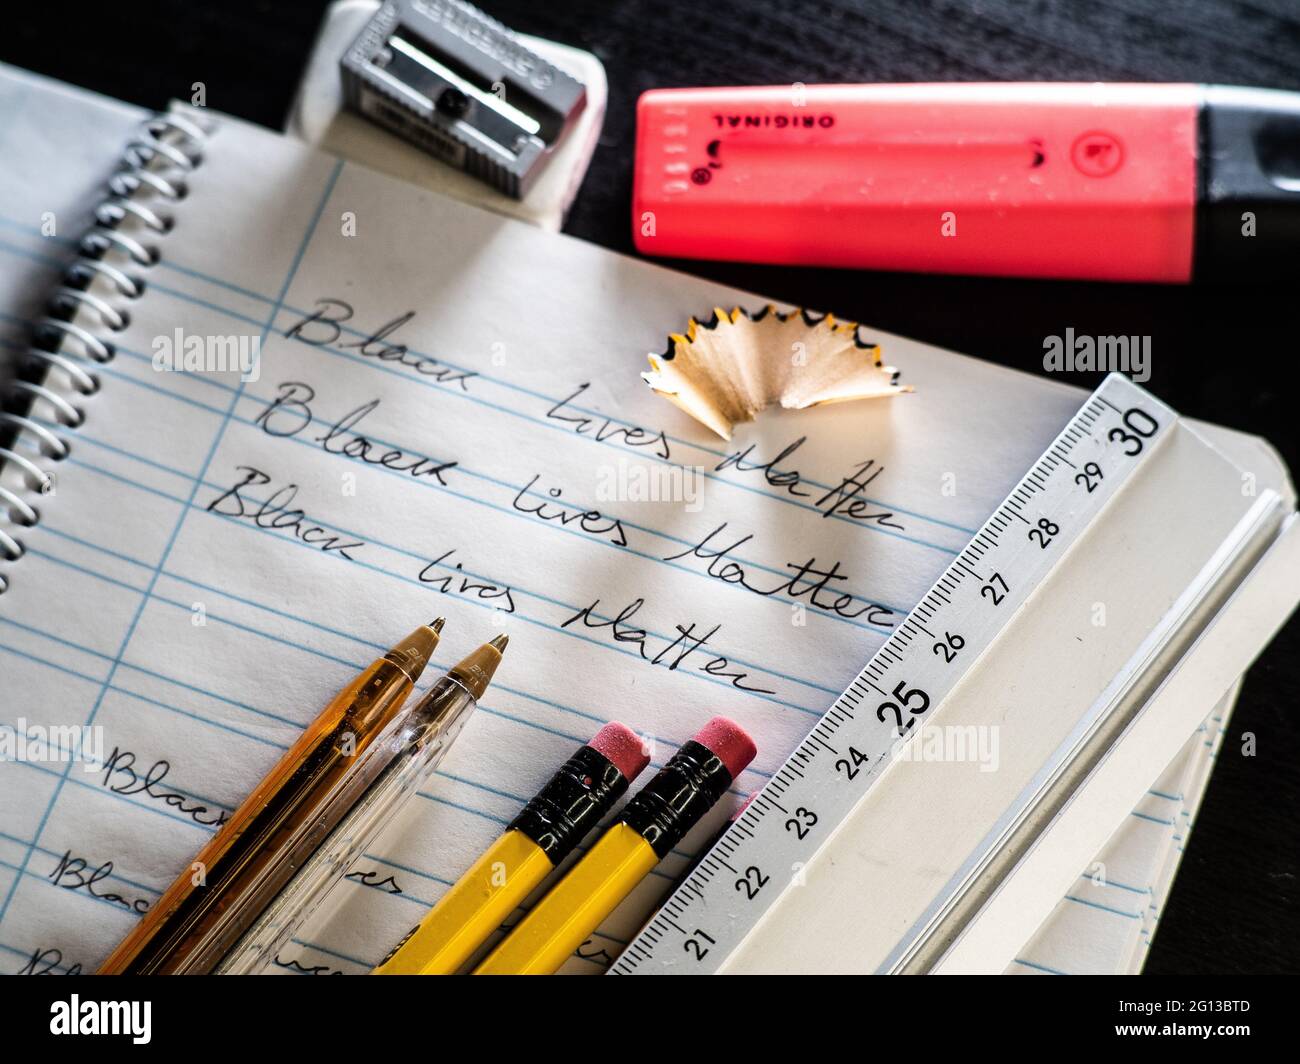 Black Lives Matter slogan written on a school calligraphy notebook, next to him rubber, pencil, pencil sharpener, pen and marker Stock Photo